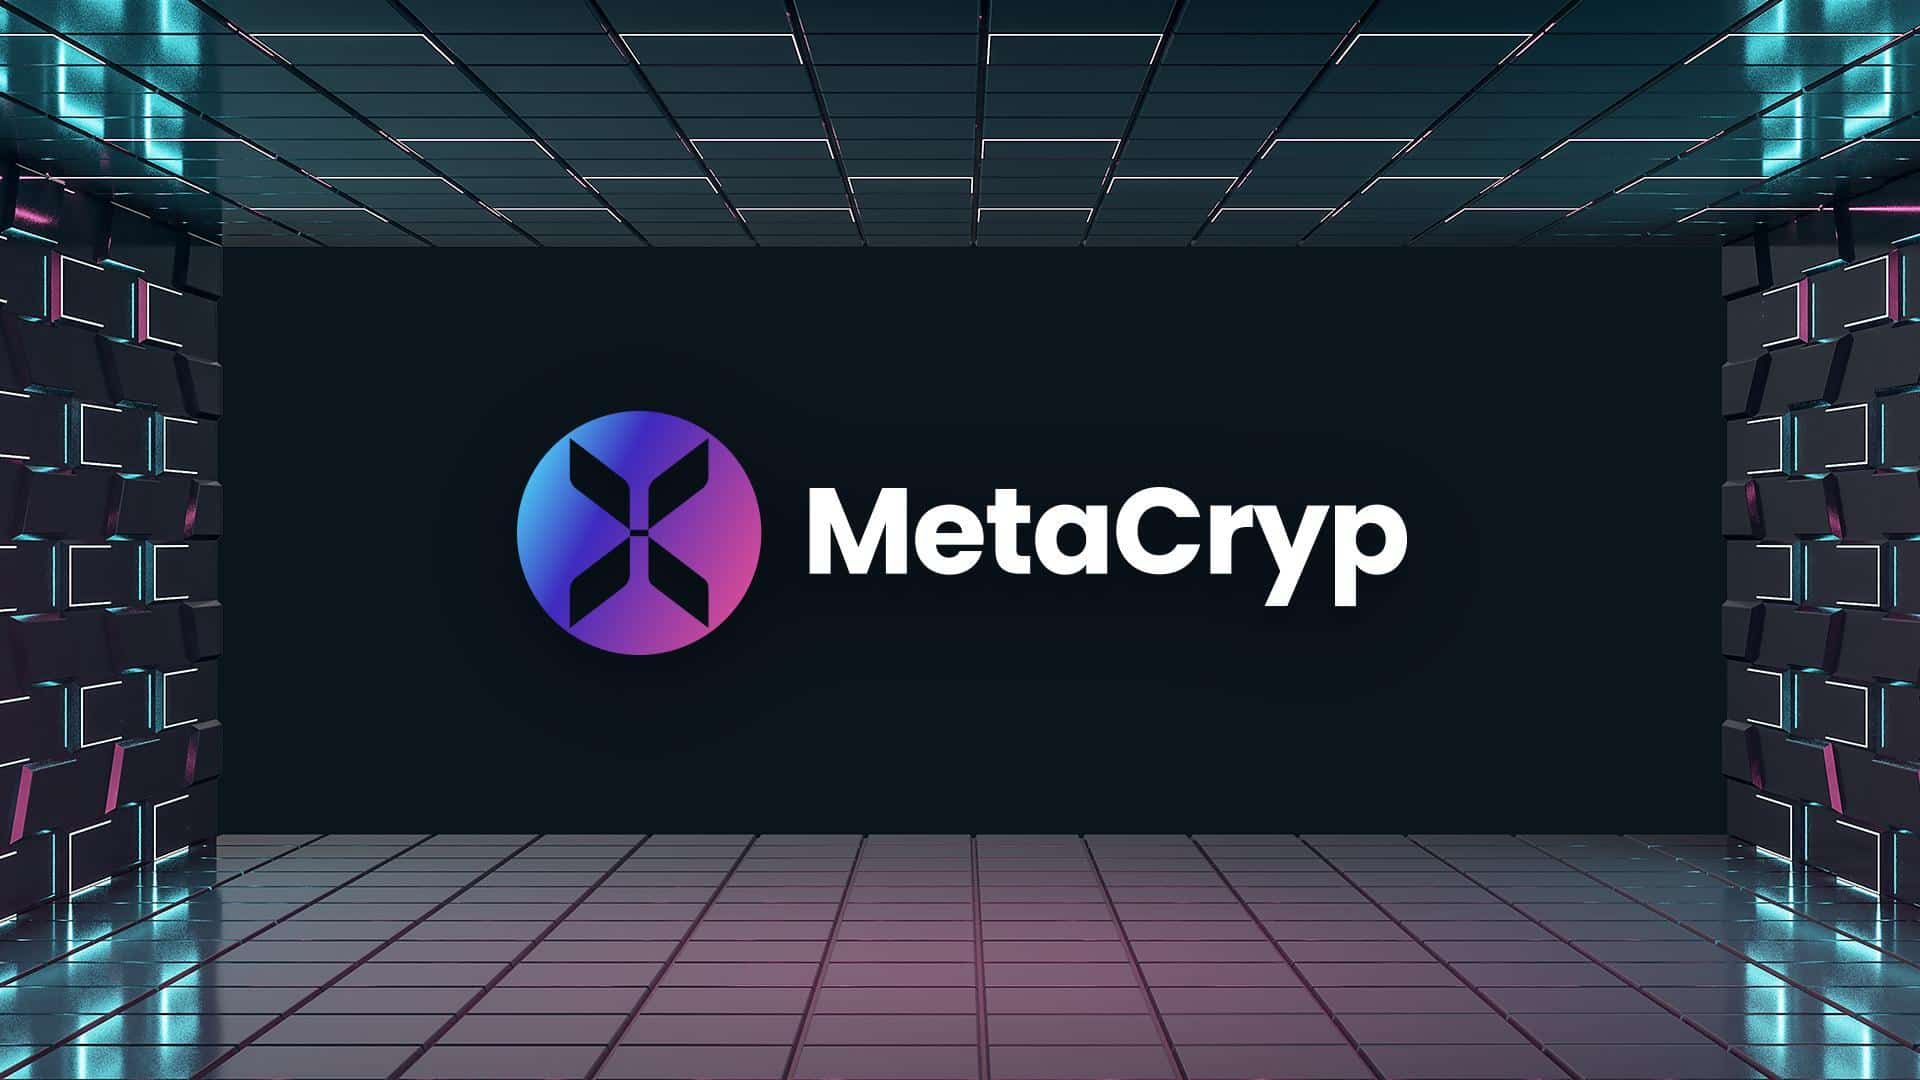 Pancakeswap And Metacryp – Two Platforms With Features Similar To The Ethereum Blockchain